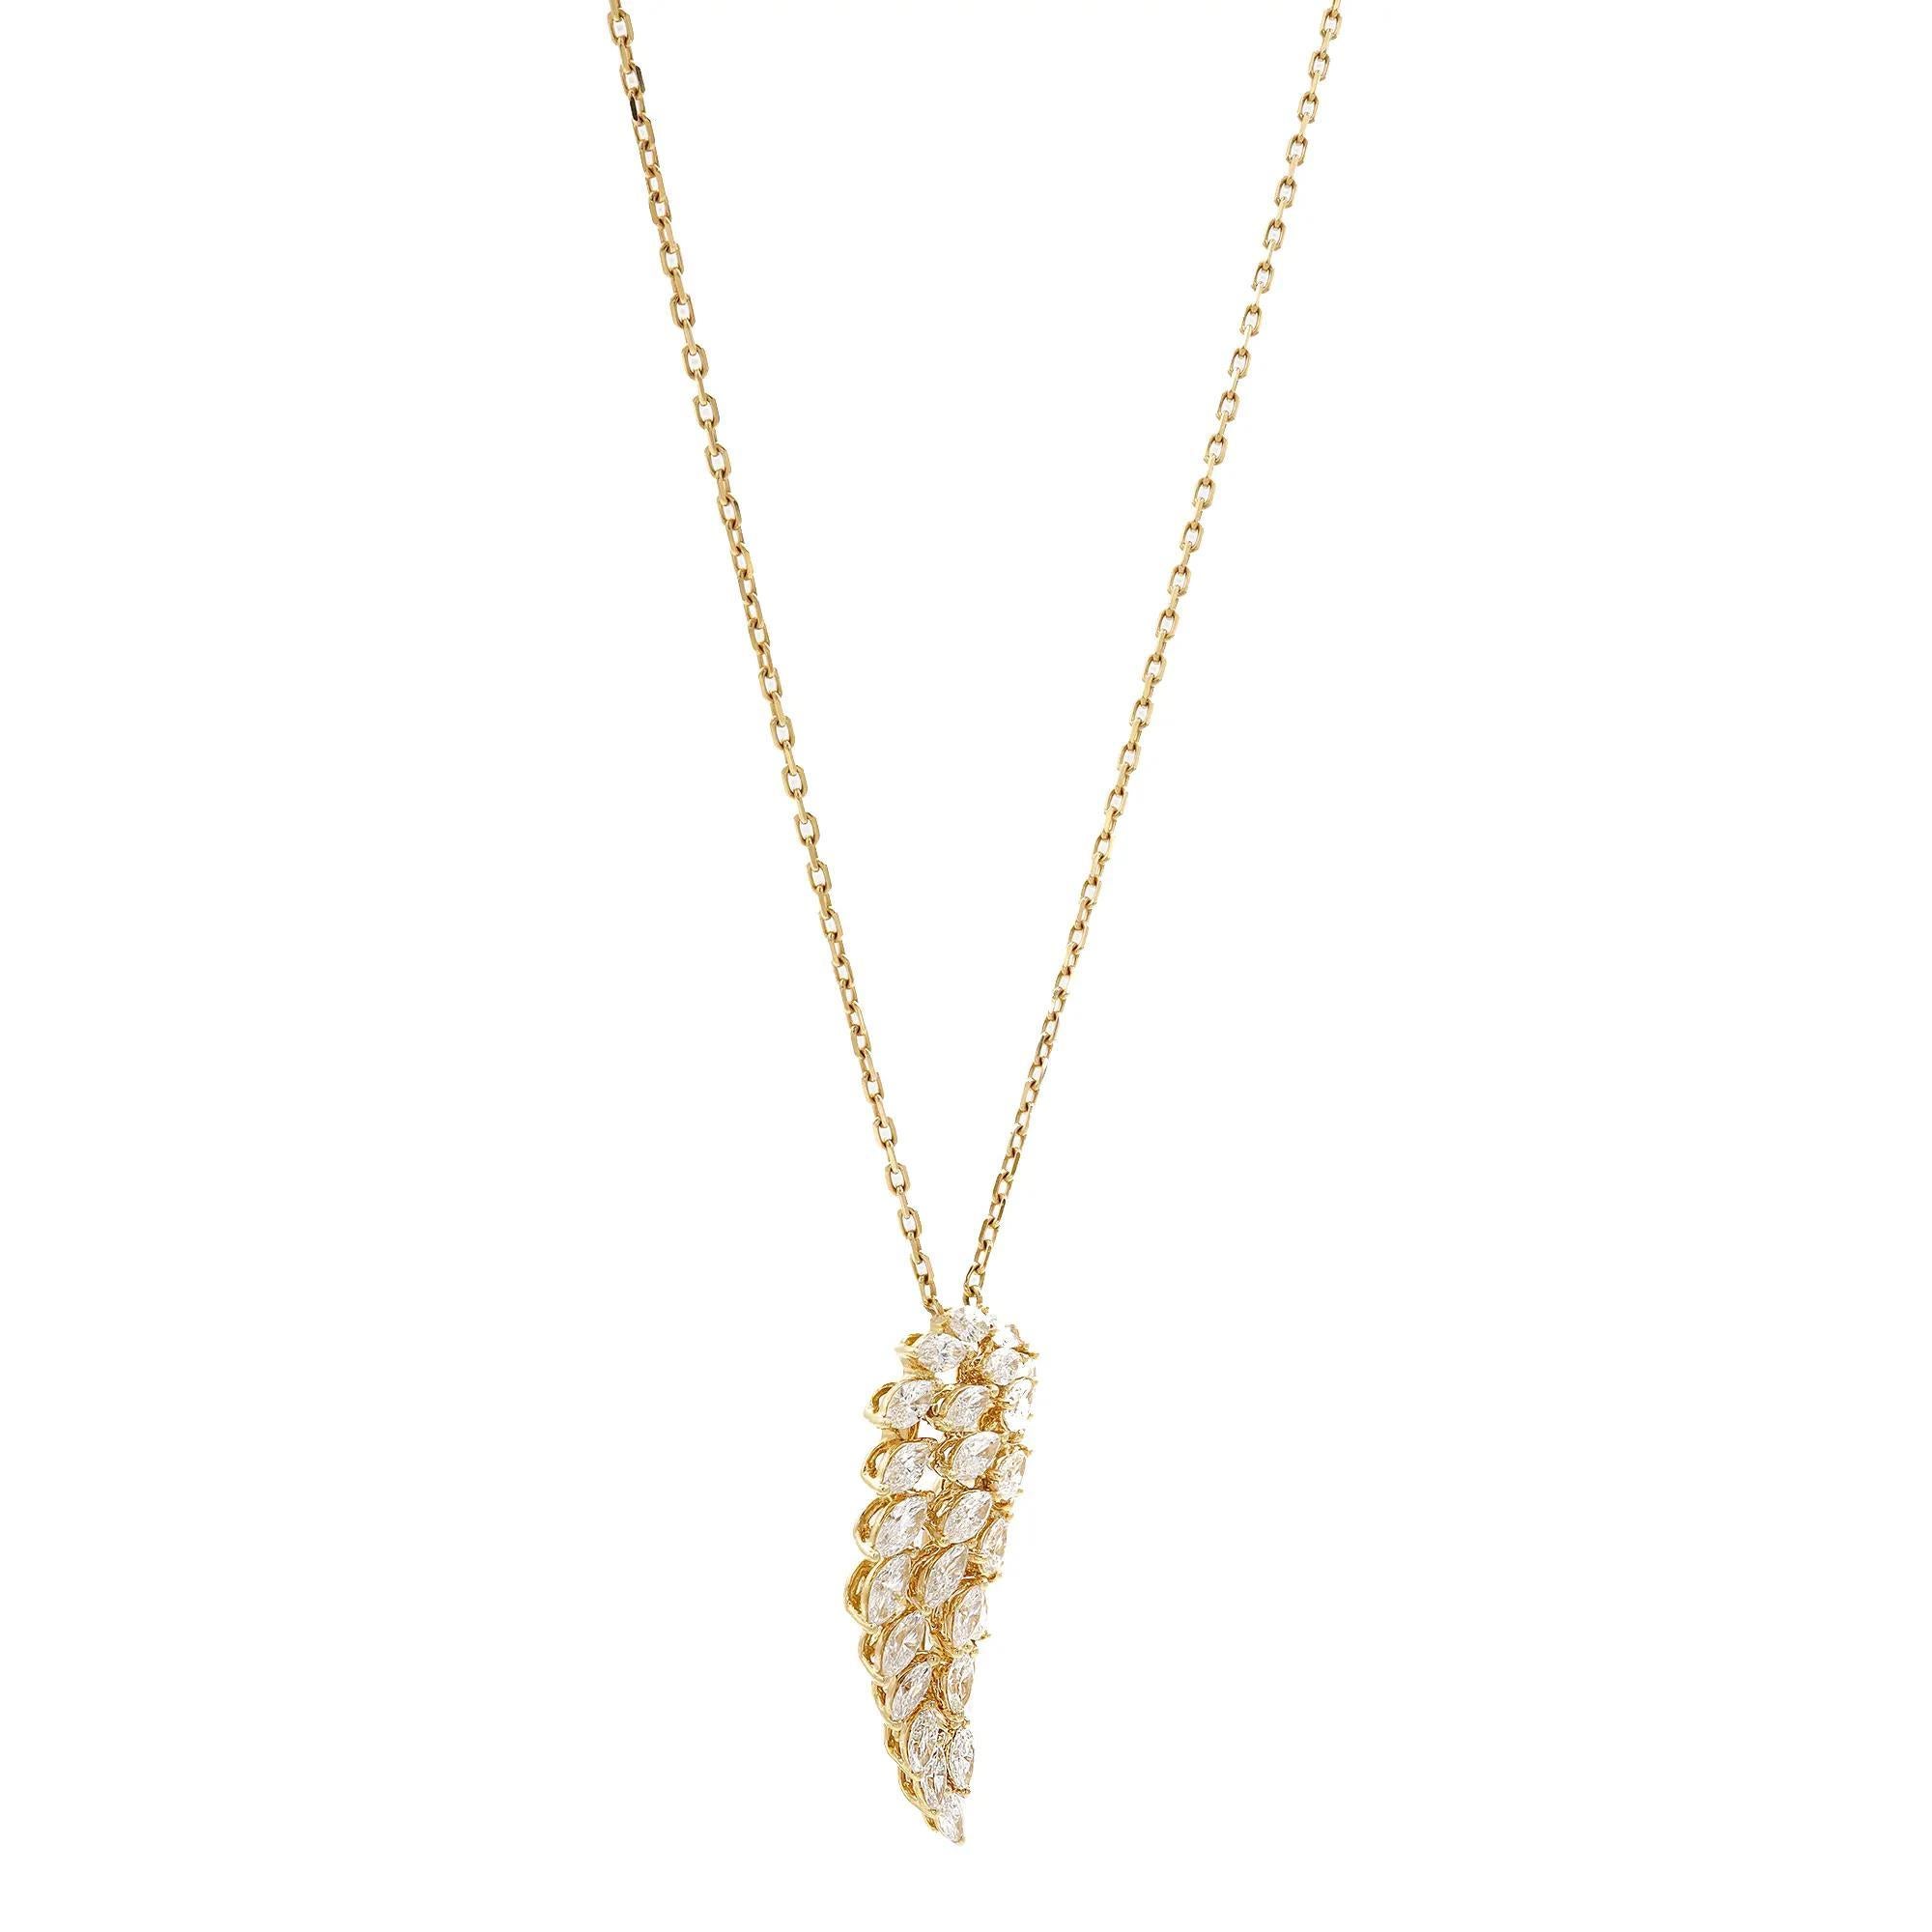 Fabulous and chic, this dazzling Messika Angel diamond pendant chain necklace is a standout addition to your everyday and evening looks. This piece gives a touch of elegance to any ensemble you pair it with. Features prong set marquise and pear